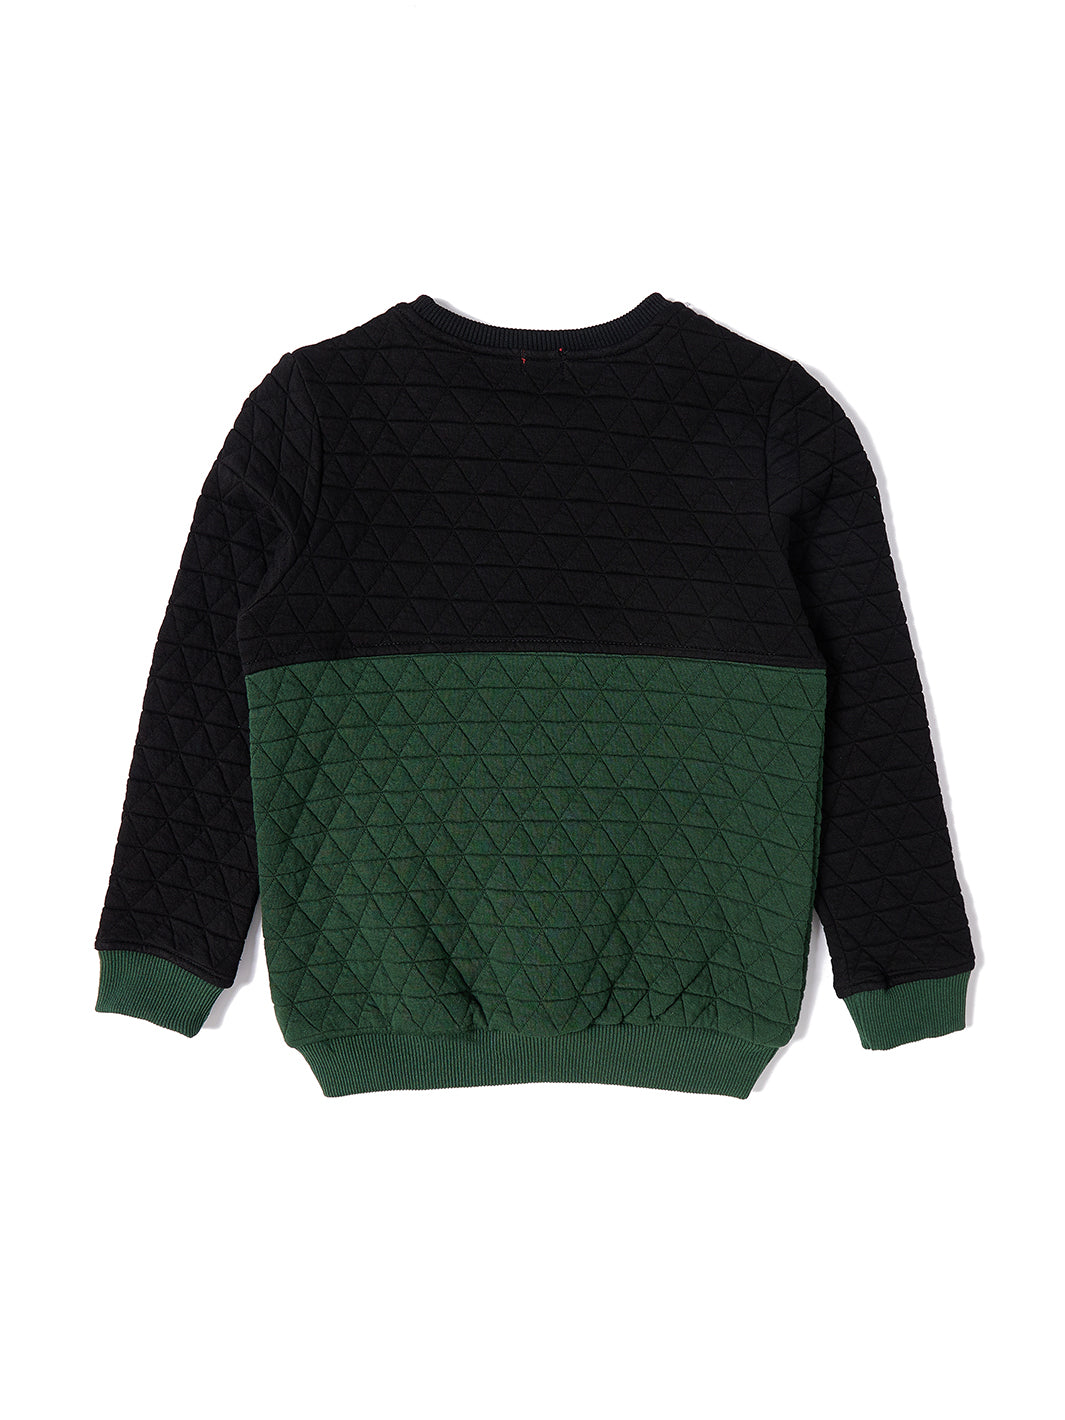 Triangle Quilted Contrast Bottom Top - Green/Black